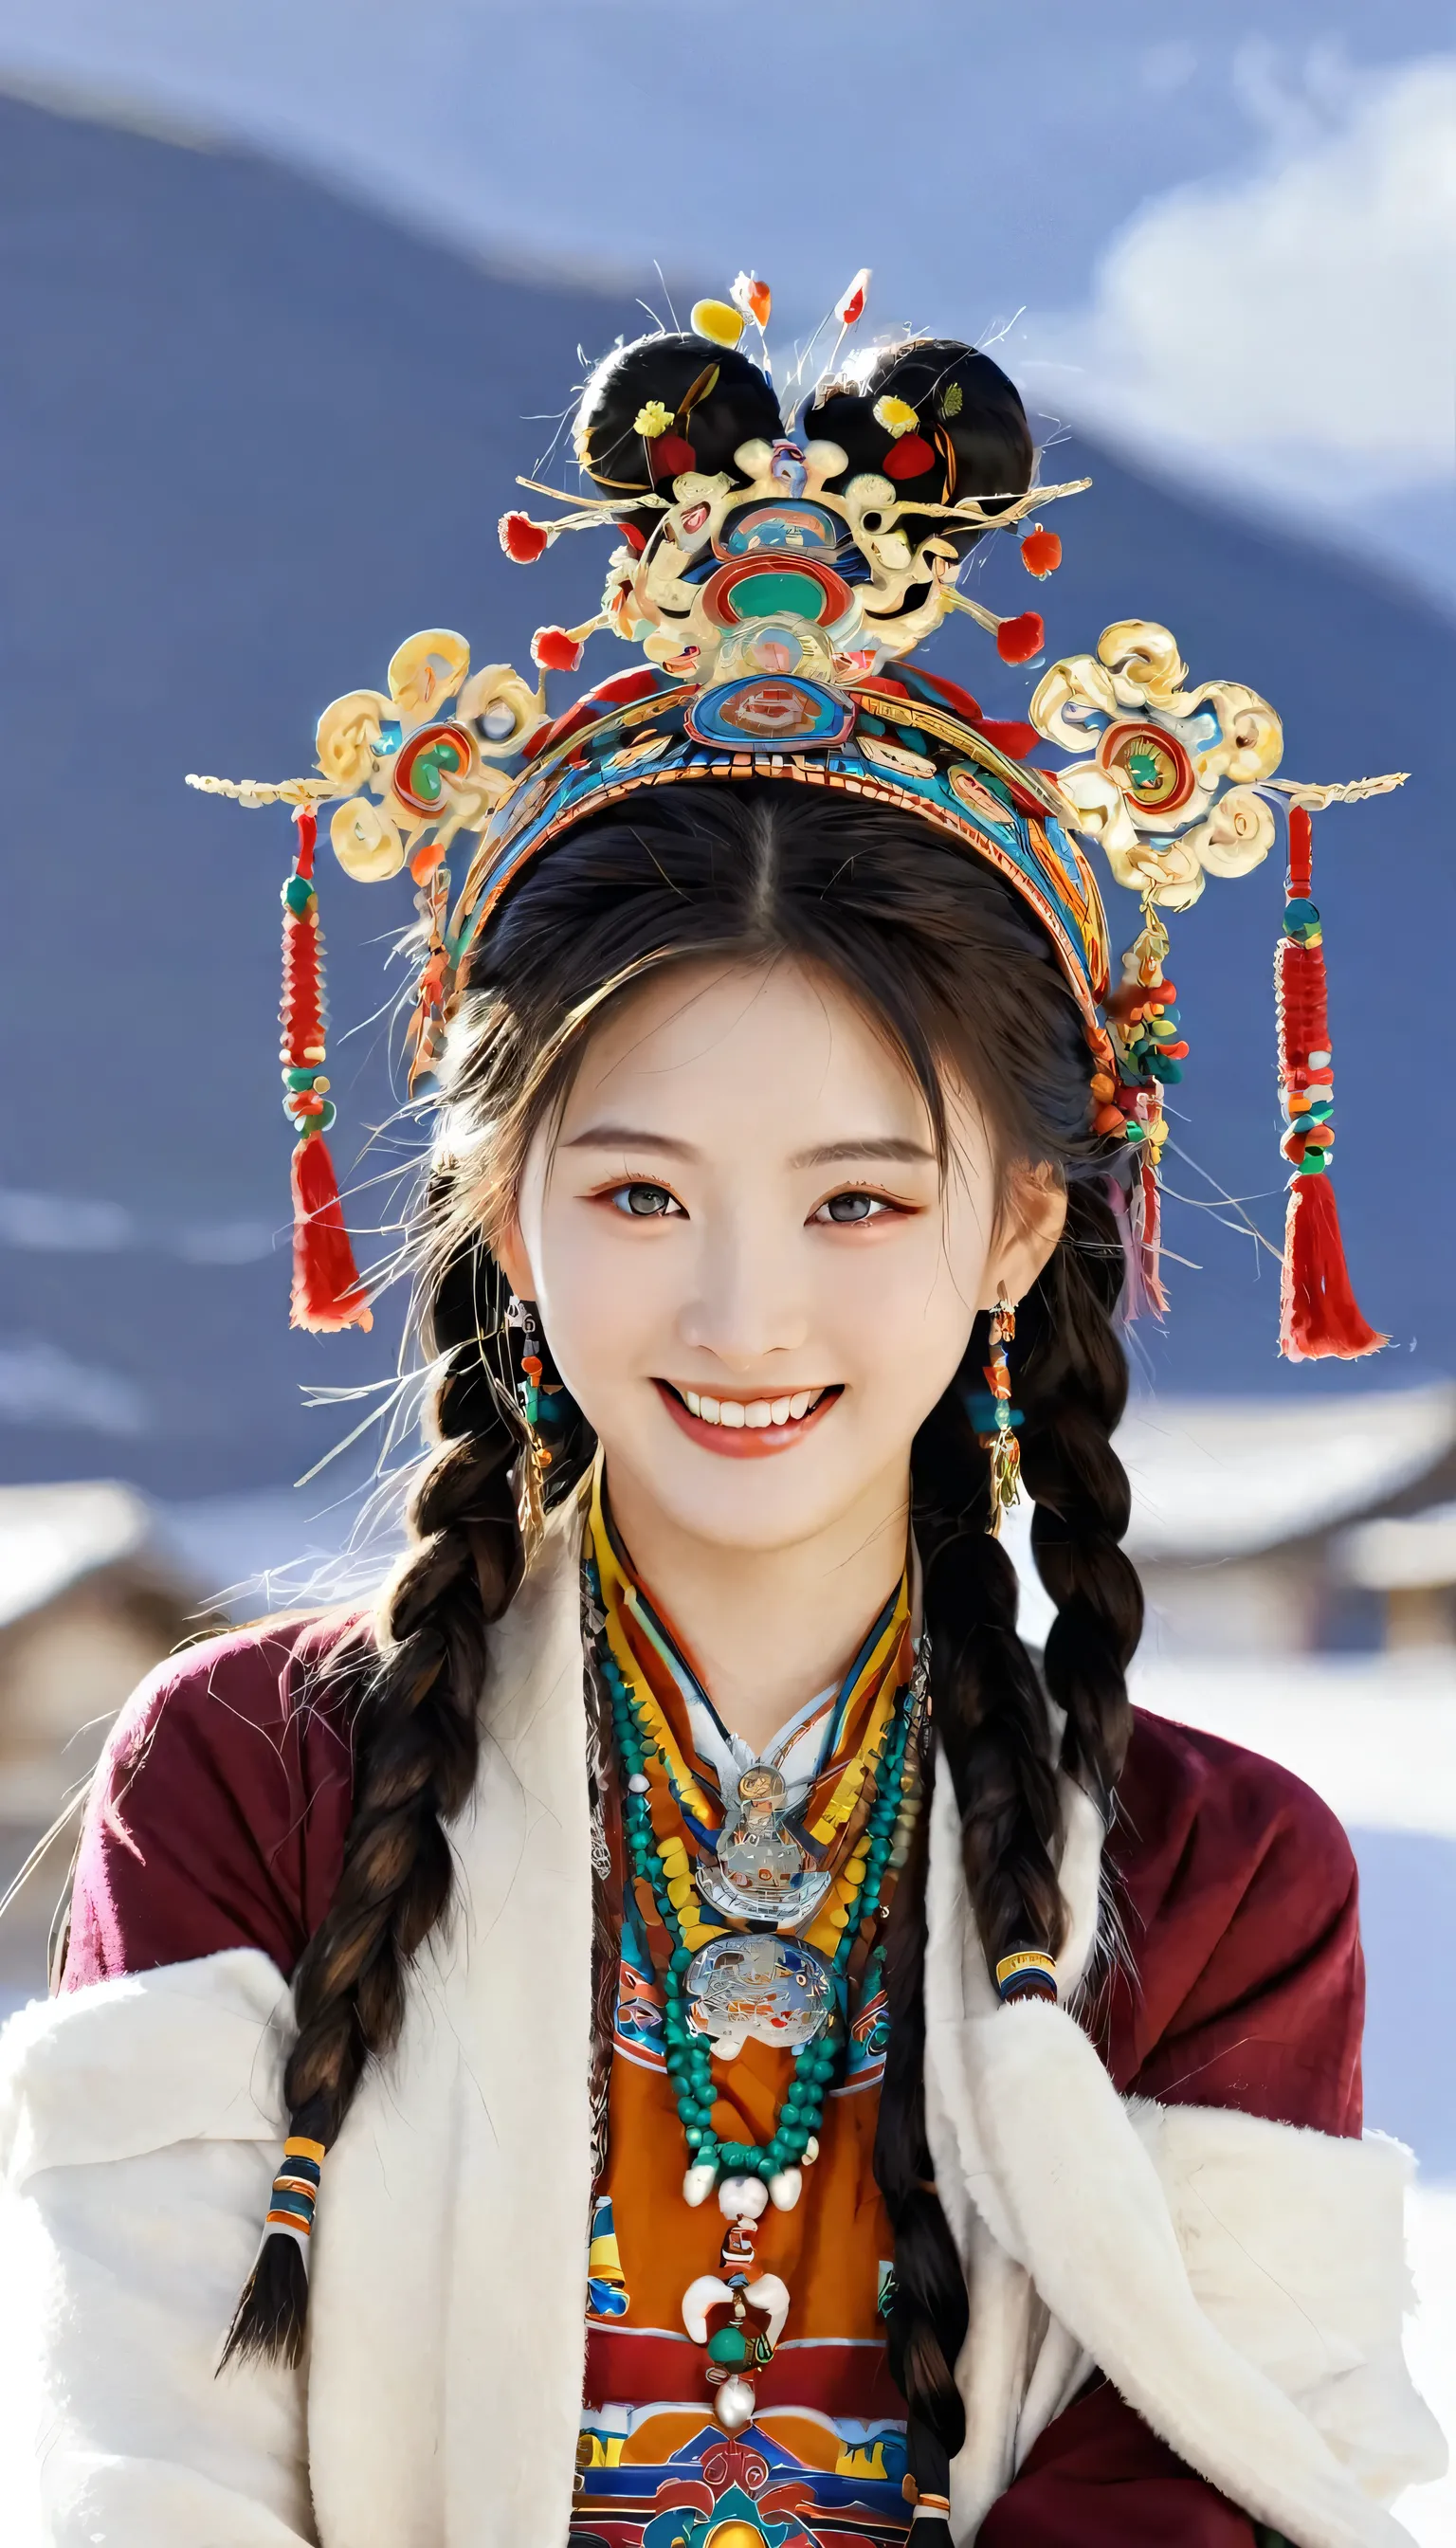 A girl, Long braids, Tibetan girl, close up, Raise your head slightly, Smile, Half-length photo, Upper Body, Appearance Yang Chaoyue, Gorgeous Tibetan costumes, Thick necklace, Cumbersome Tibetan headdress, Fluff on clothes, White Animal Flu, Live-action CG, Sweet style, style, HD 8K